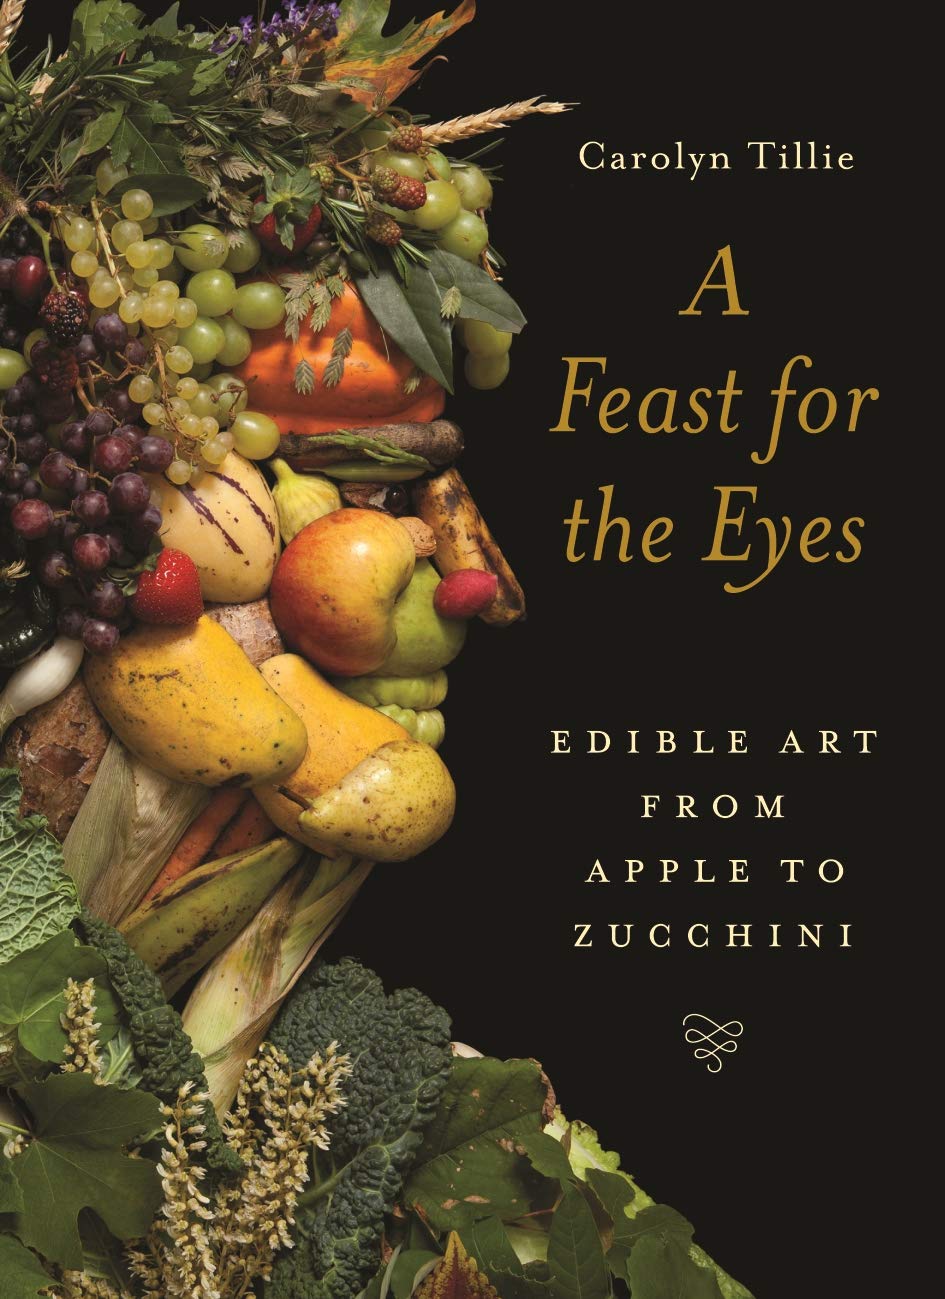 A Feast for the Eyes: Edible Art from Apple to Zucchini (Carolyn Tillie)